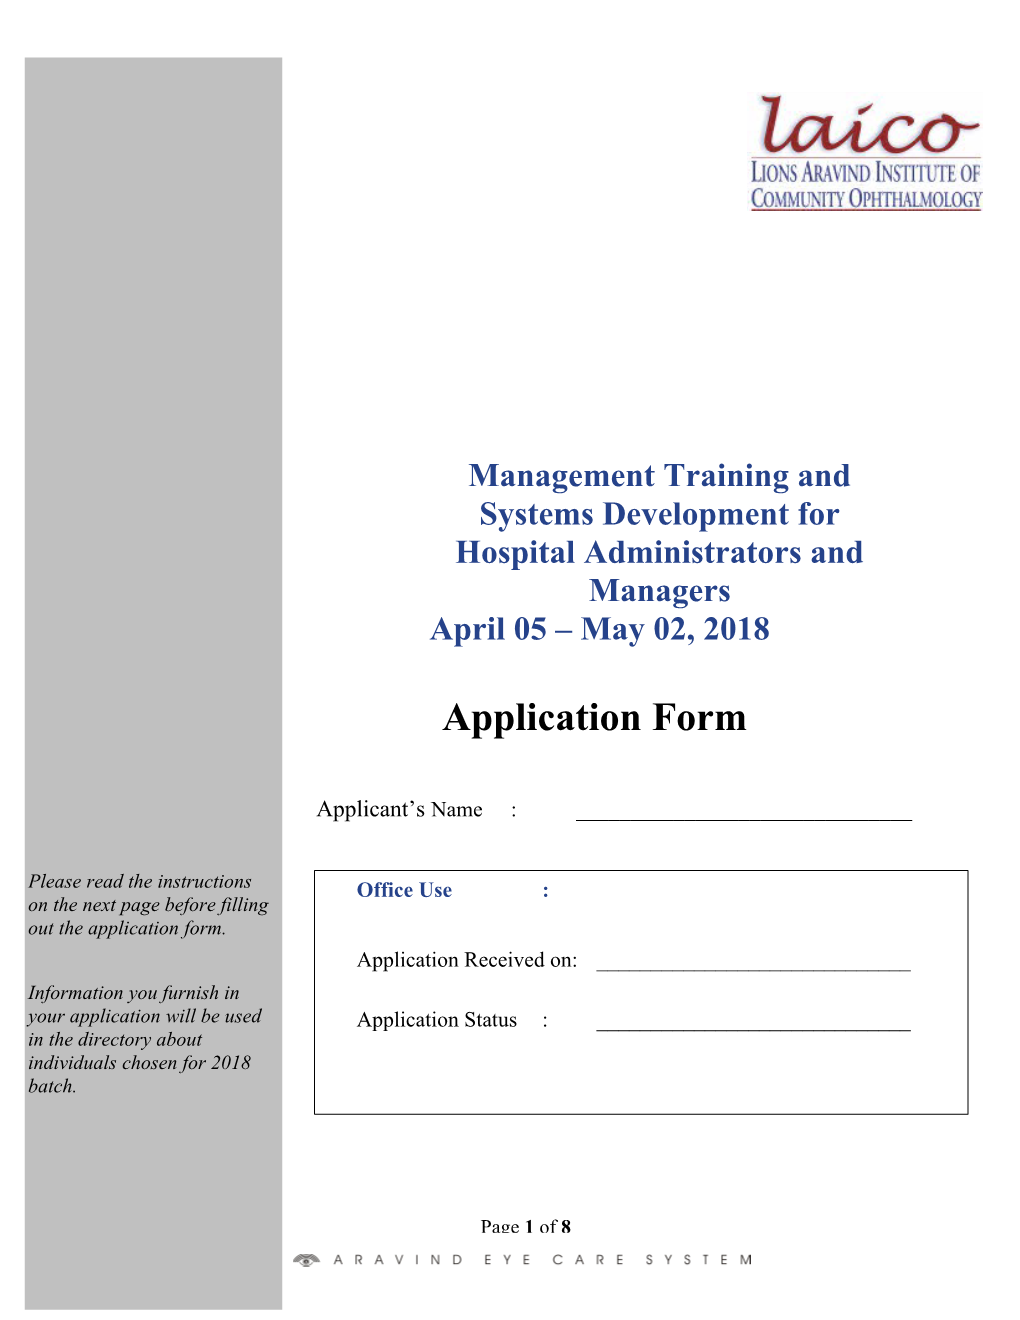 Management Training and Systems Development for Hospital Administrators and Managers